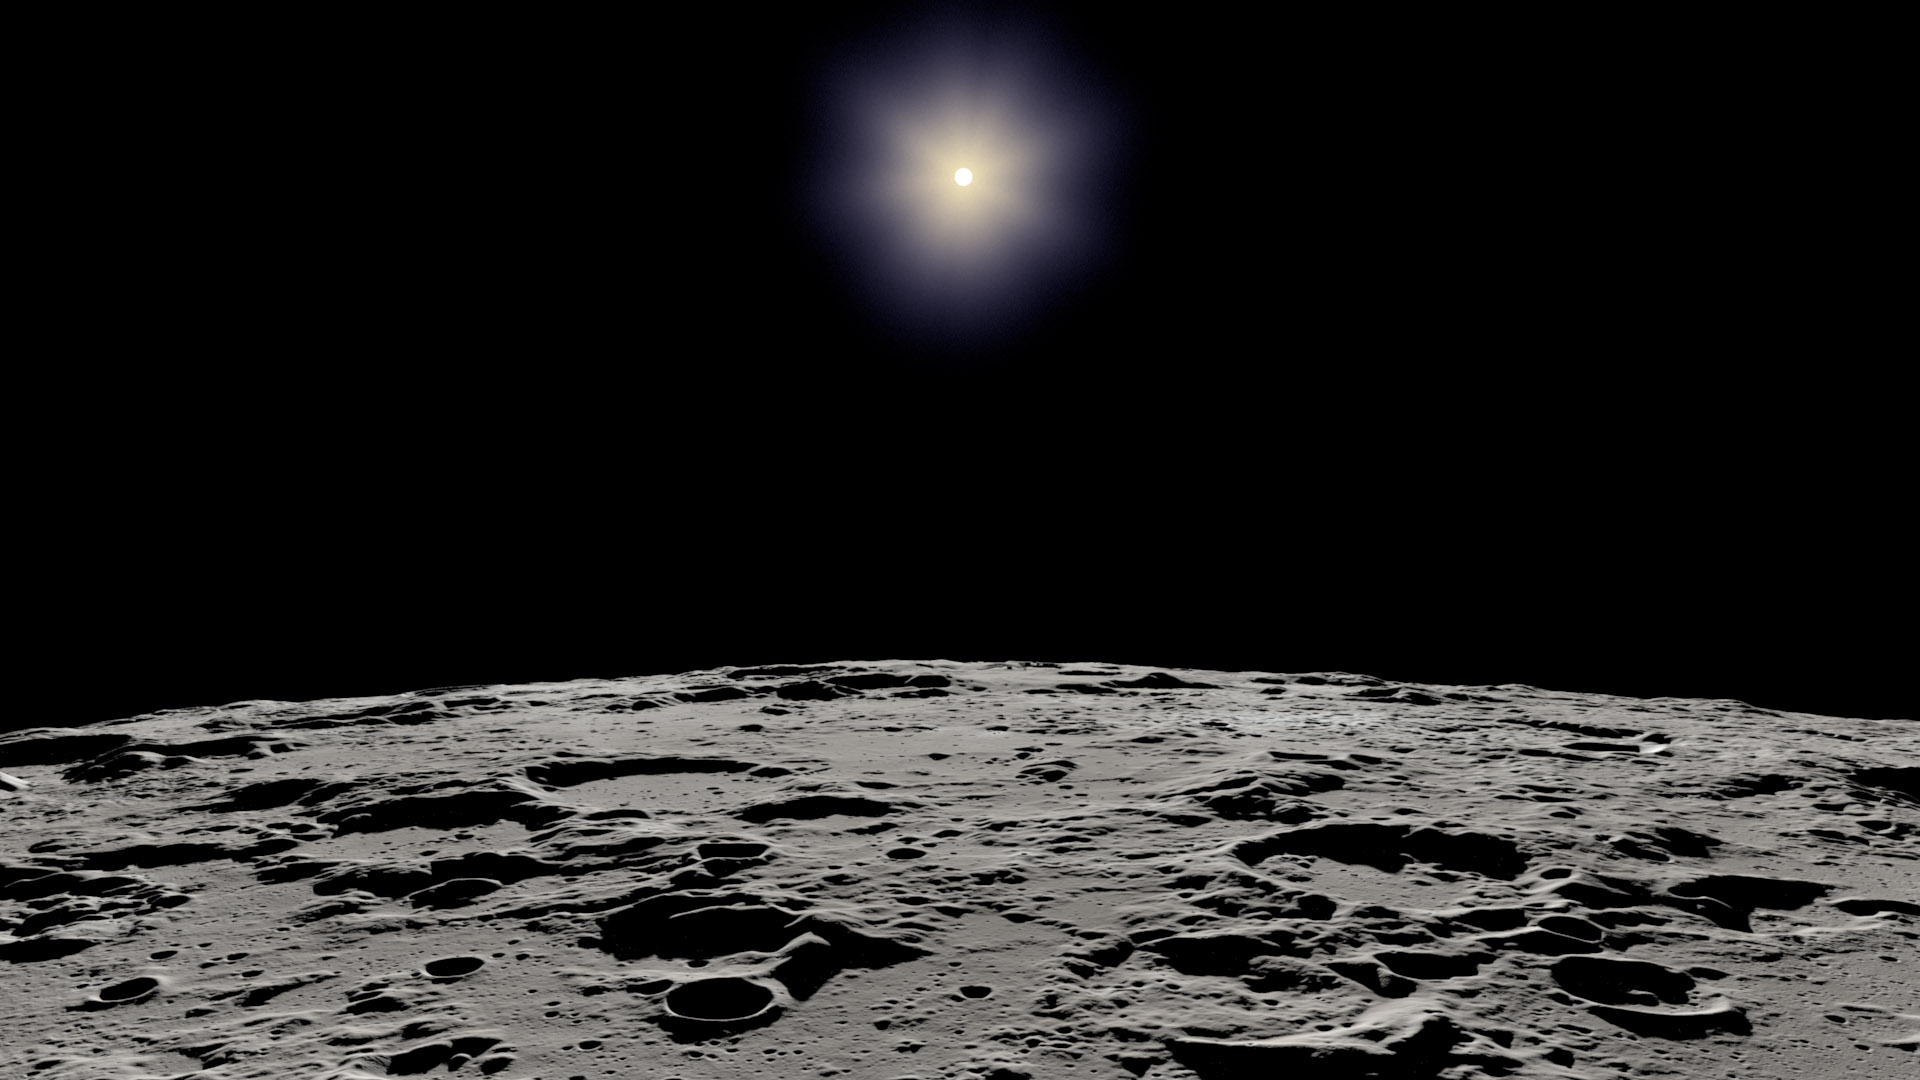 The Sun, represented as a bright white dot with a glowing white aura is high in a black sky. The bottom third of the image shows a jagged and cratered gray curved landscape – the limb of the Moon.